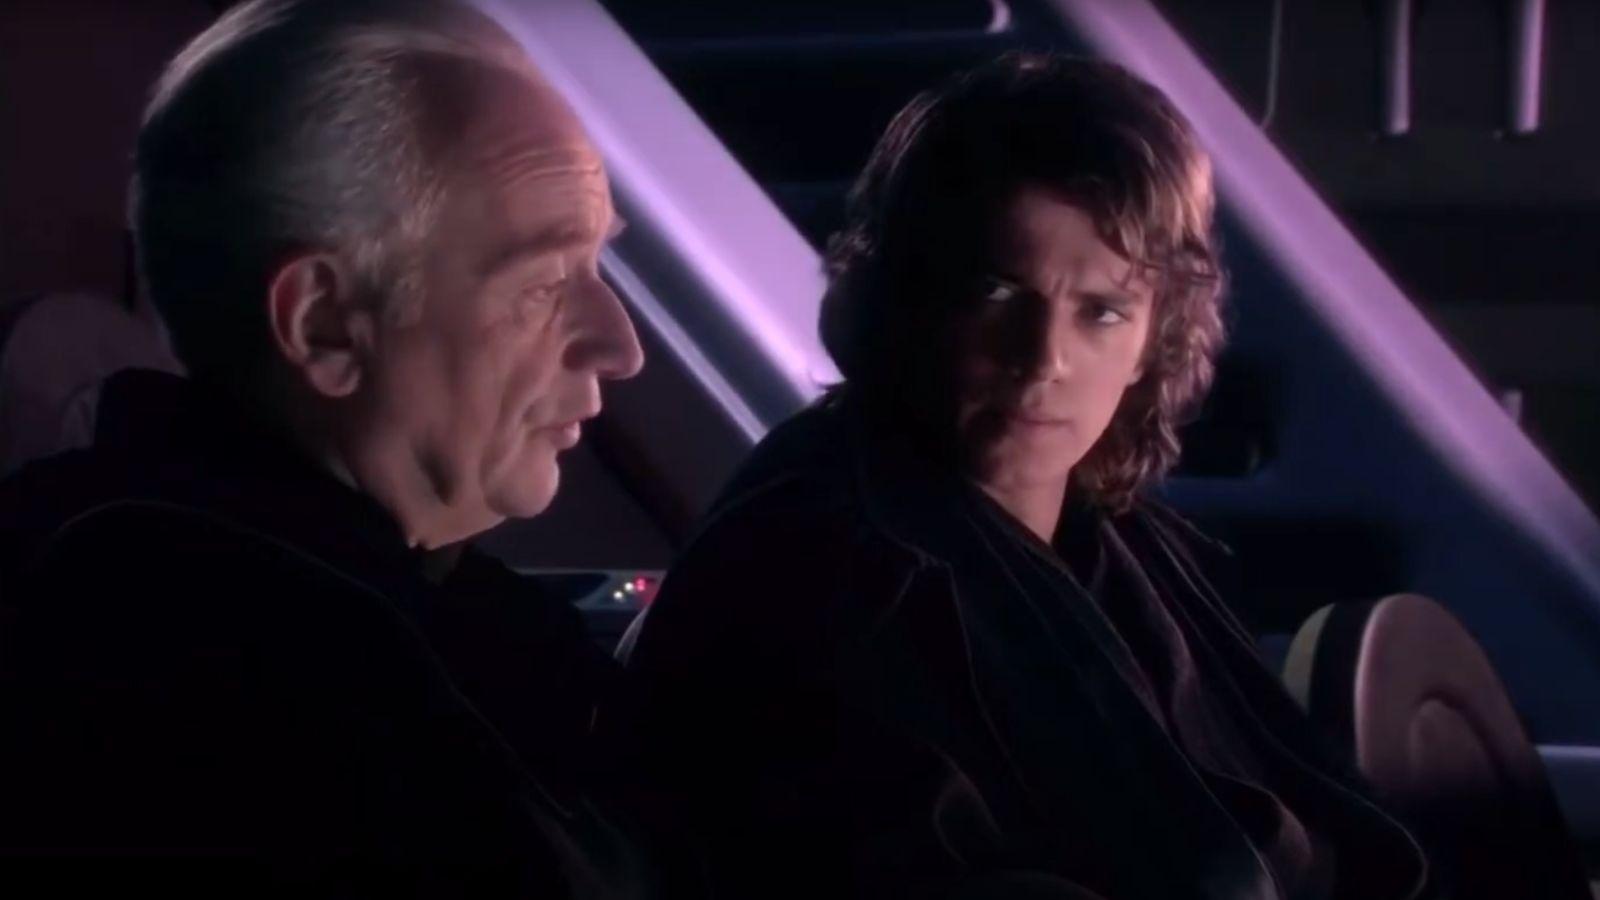 Palpatine talks to Anakin in Revenge of the Sith.